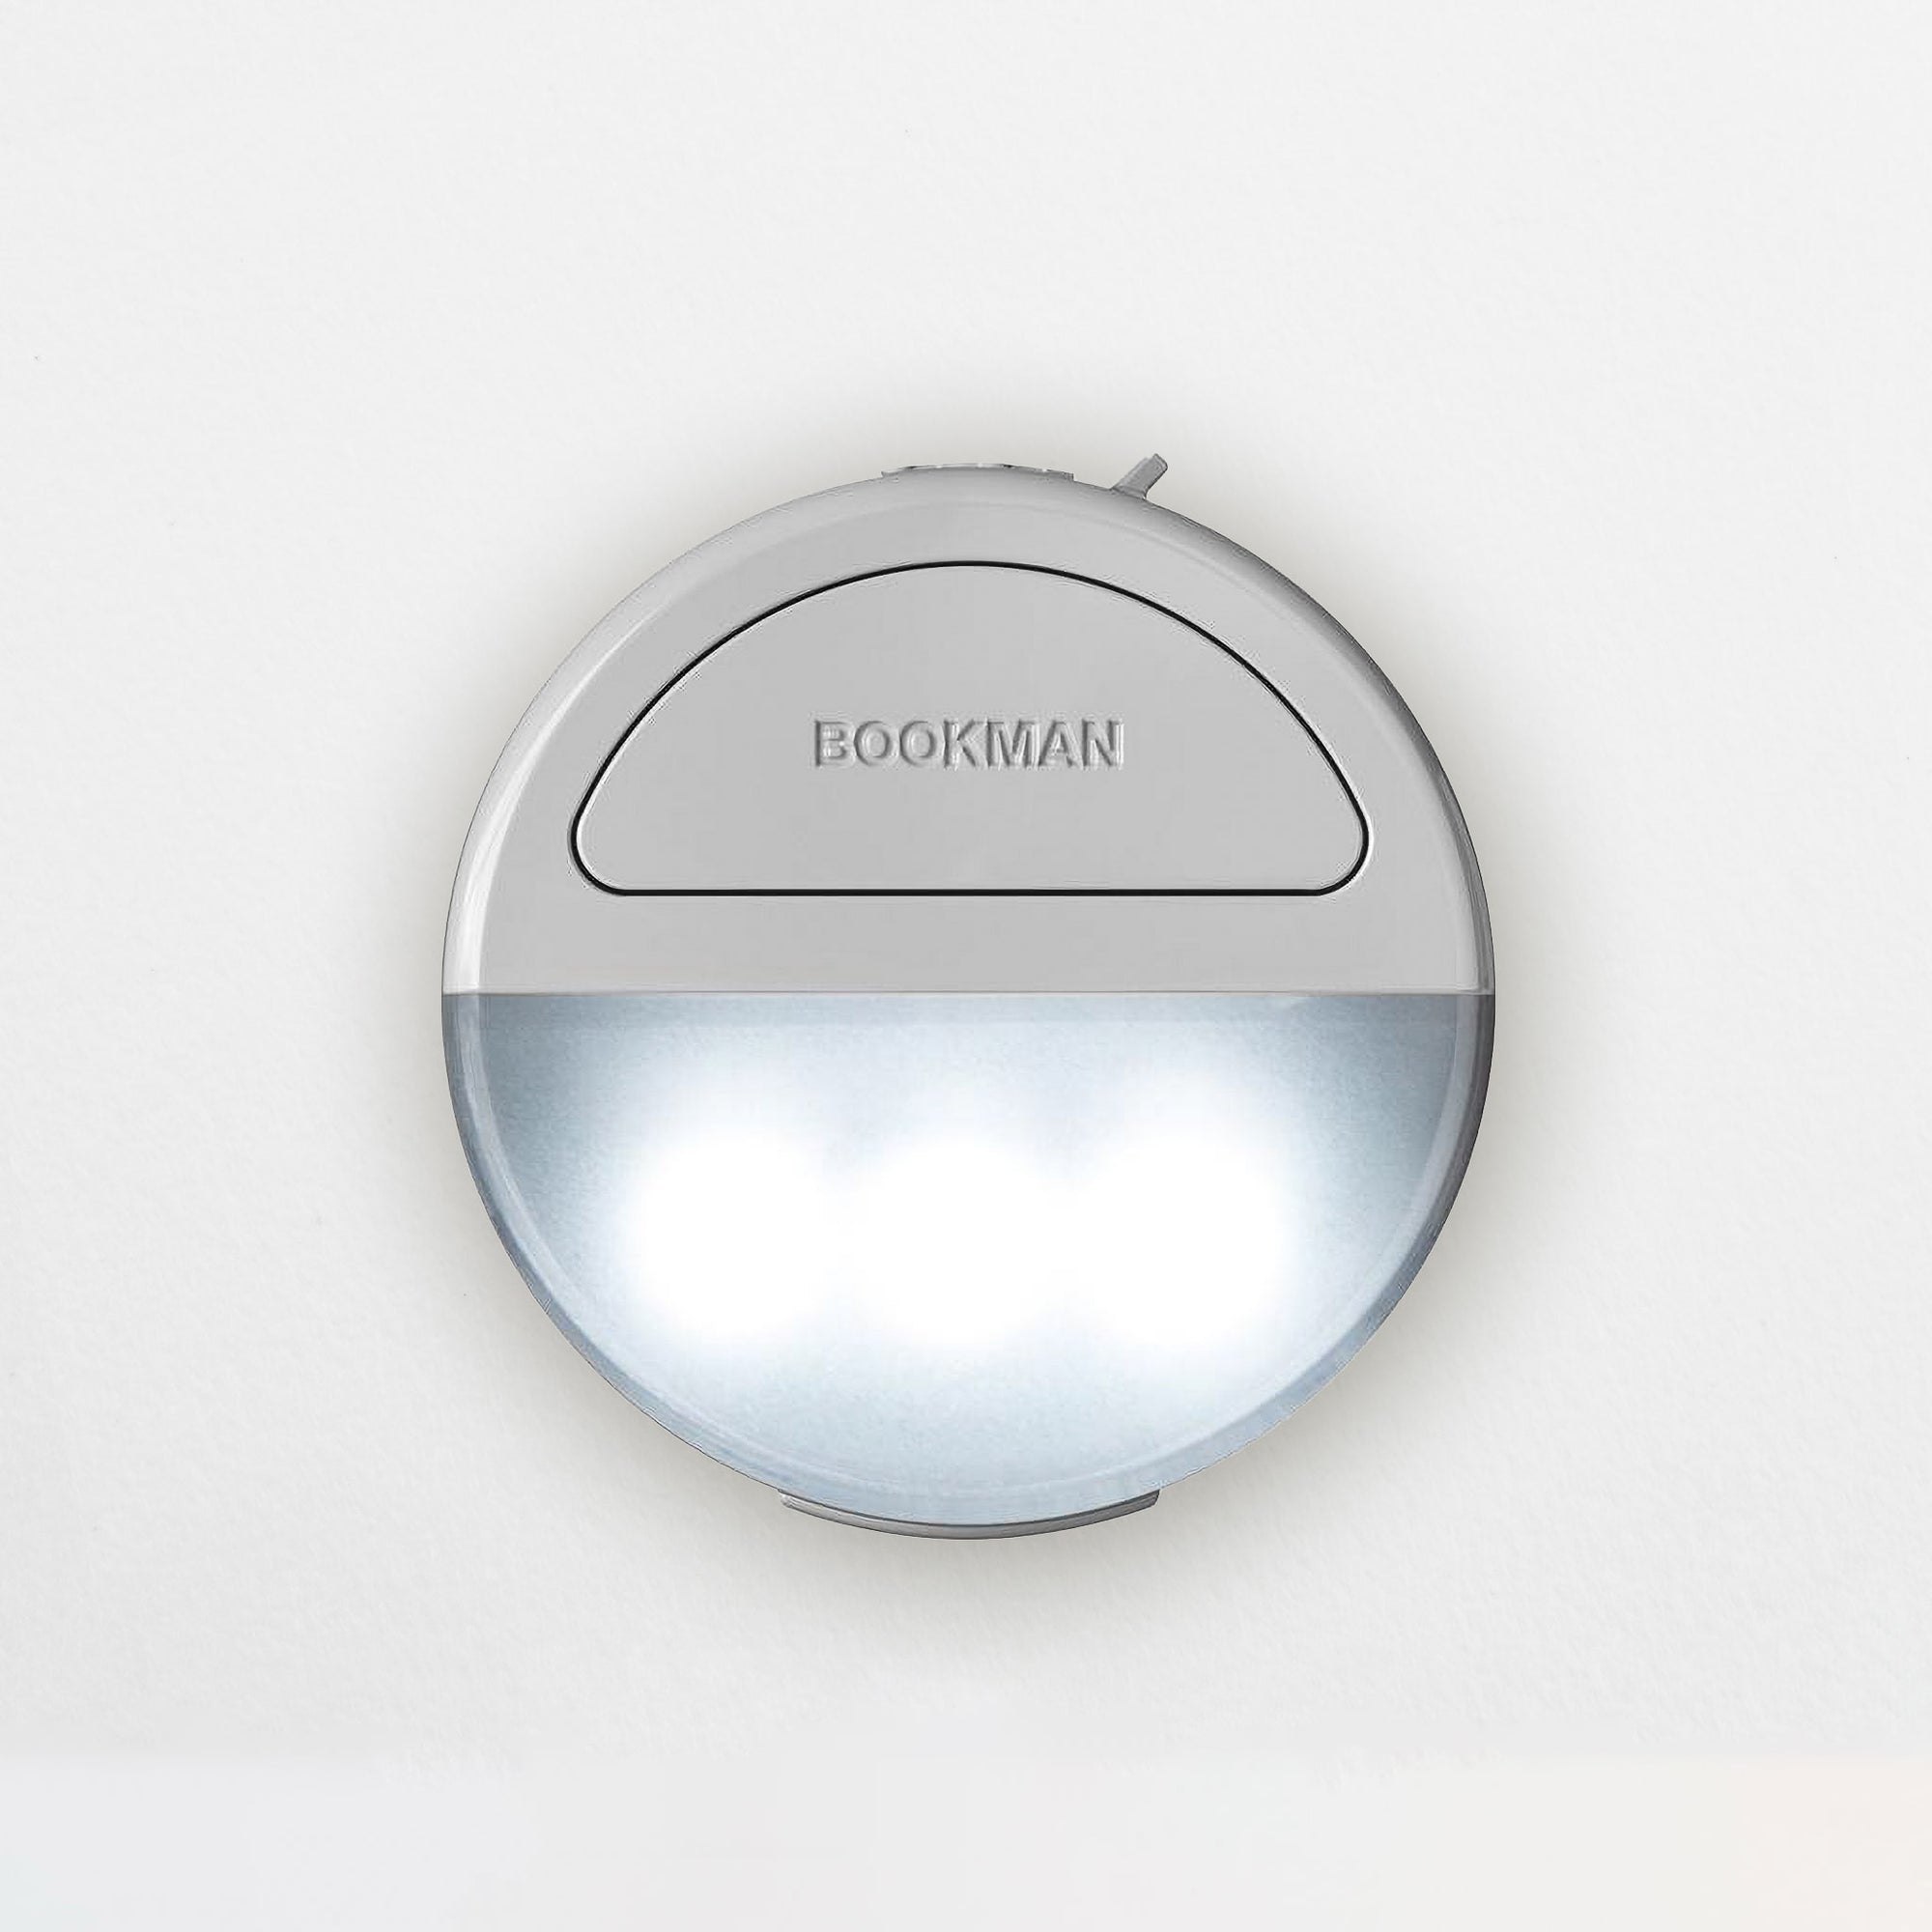 Eclipse by Bookman - Clip-On light for biking, running, walking...